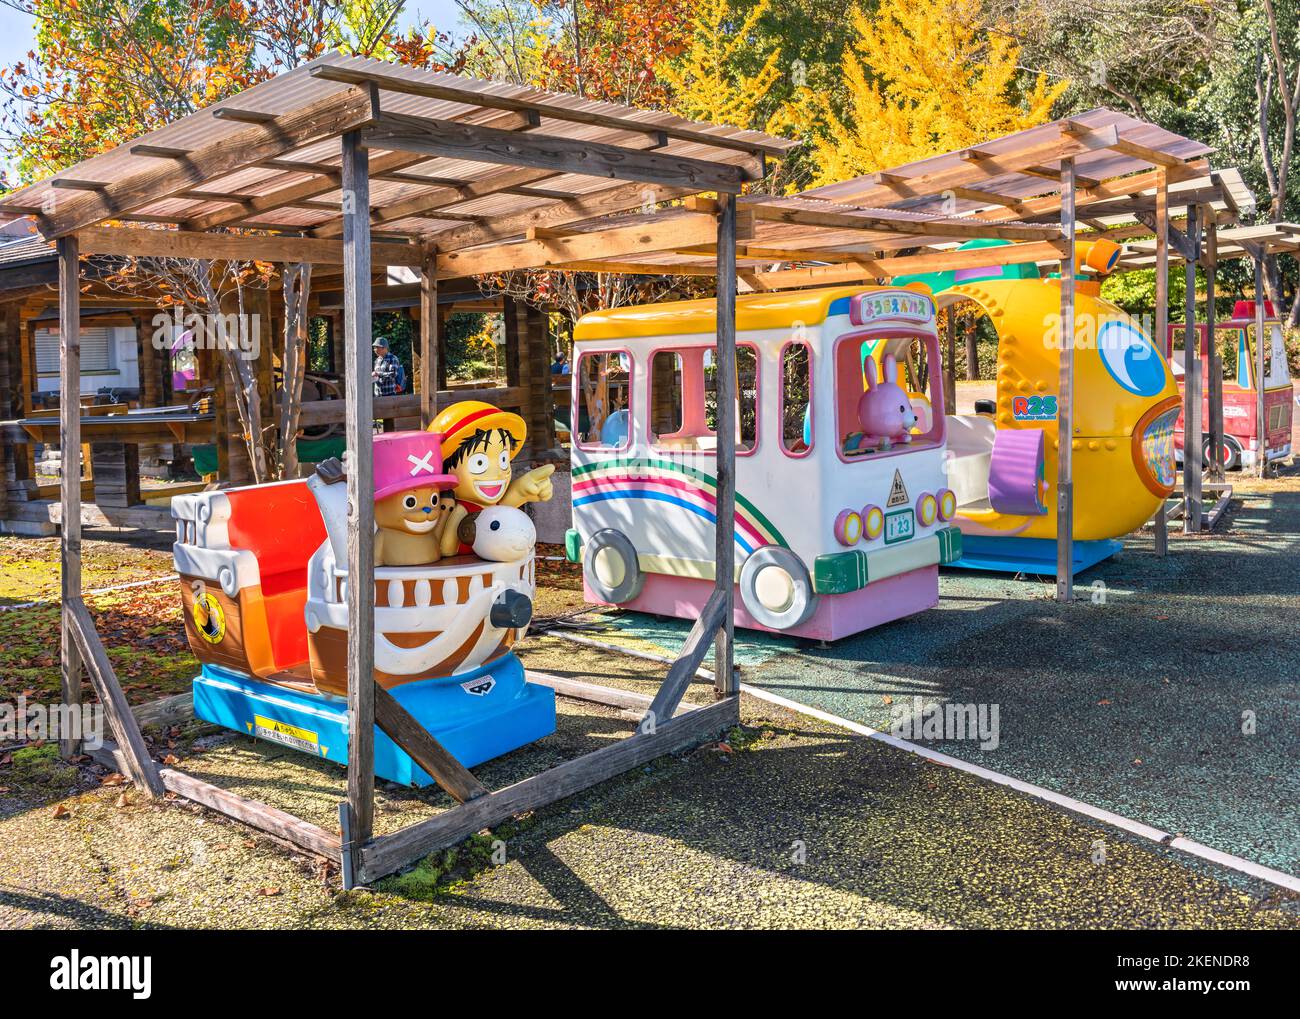 saitama, chichibu - nov 2 2022: Retro juvenile or kiddie rides of the characters Luffy and Chopper of the japanese manga and anime series One Piece on Stock Photo